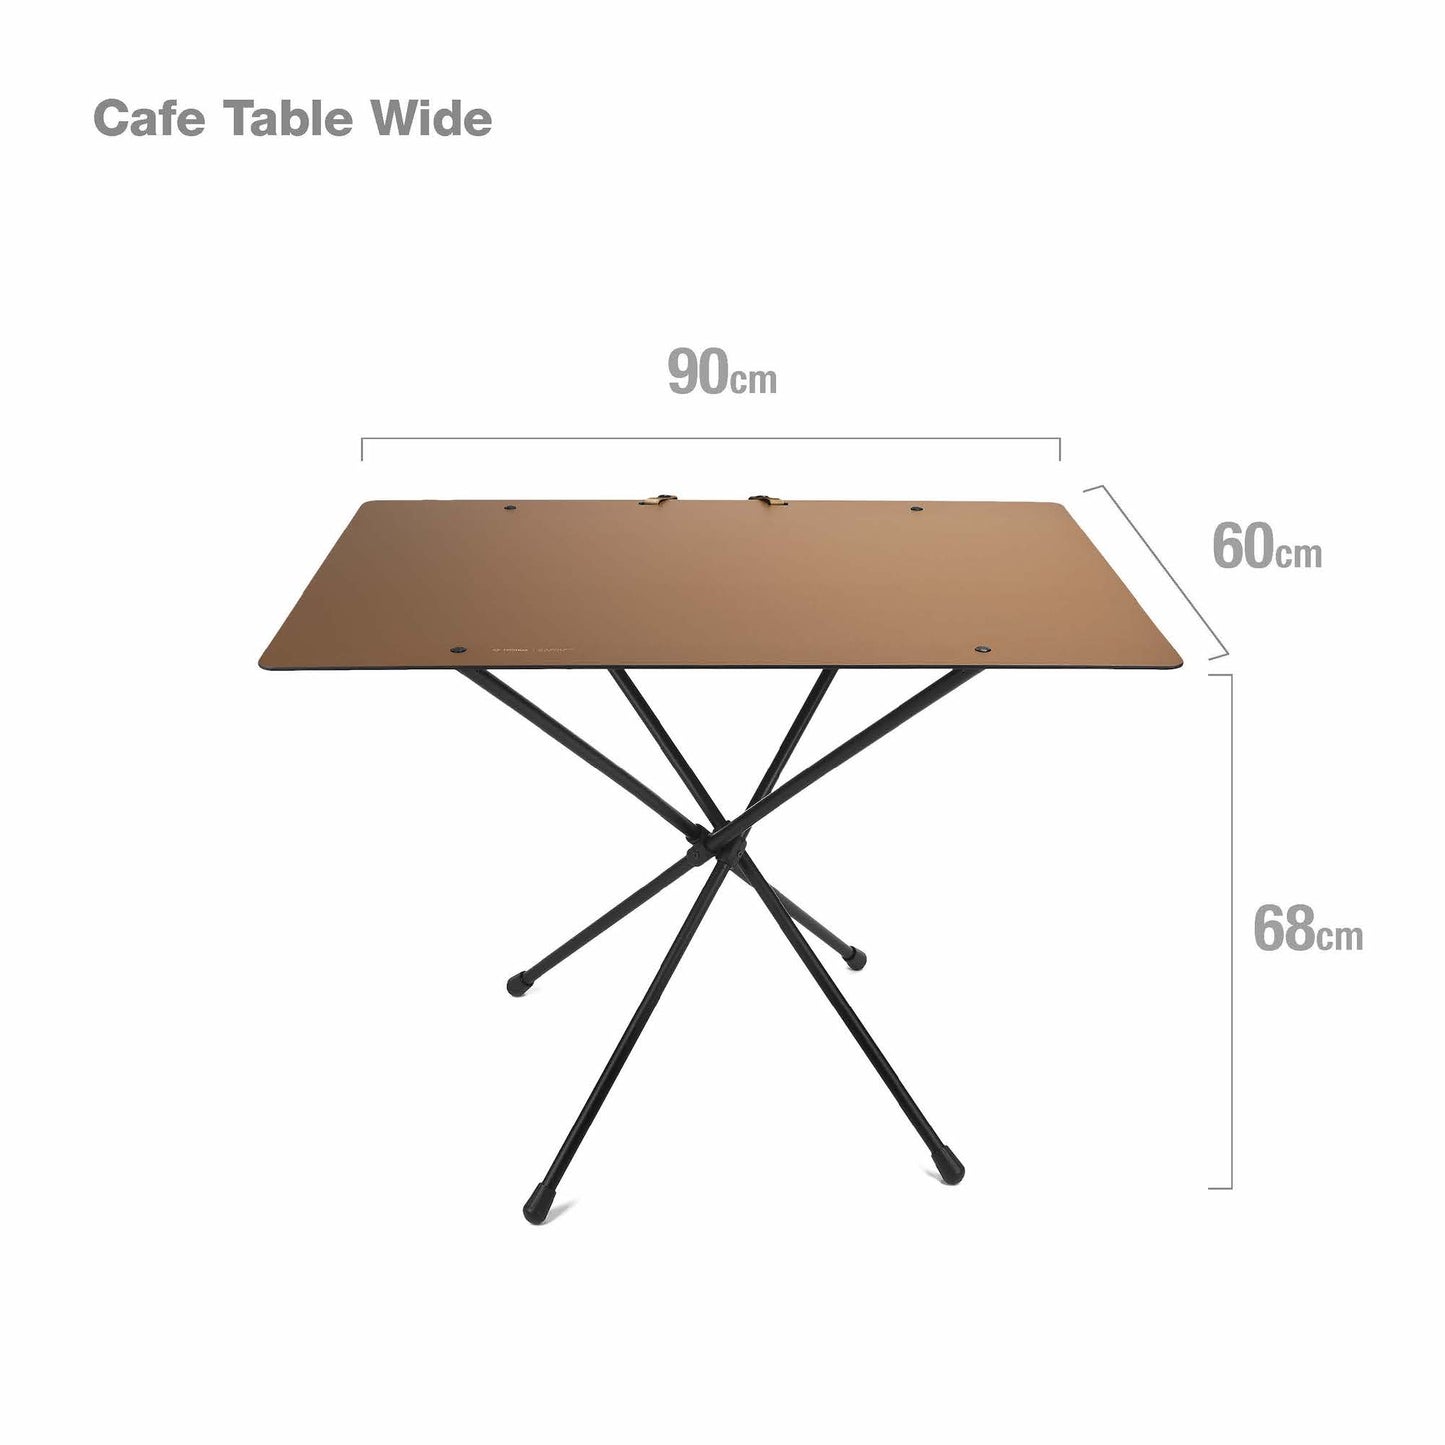 Cafe Table Wide - Coyote Tan